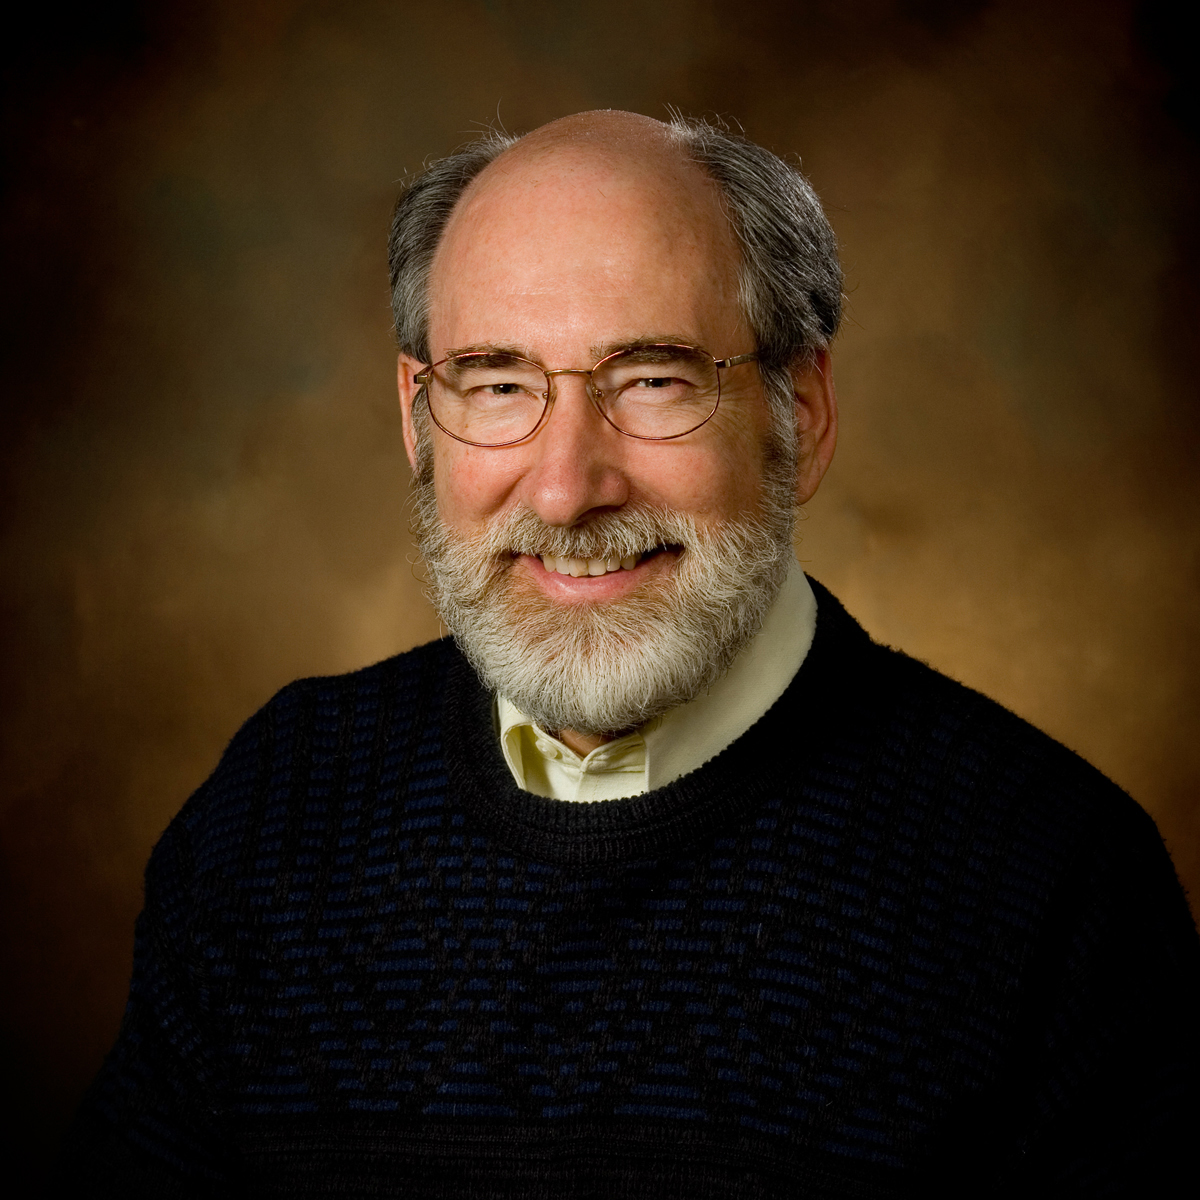 Profile headshot of a male professor wearing a white collared shirt under a black sweater